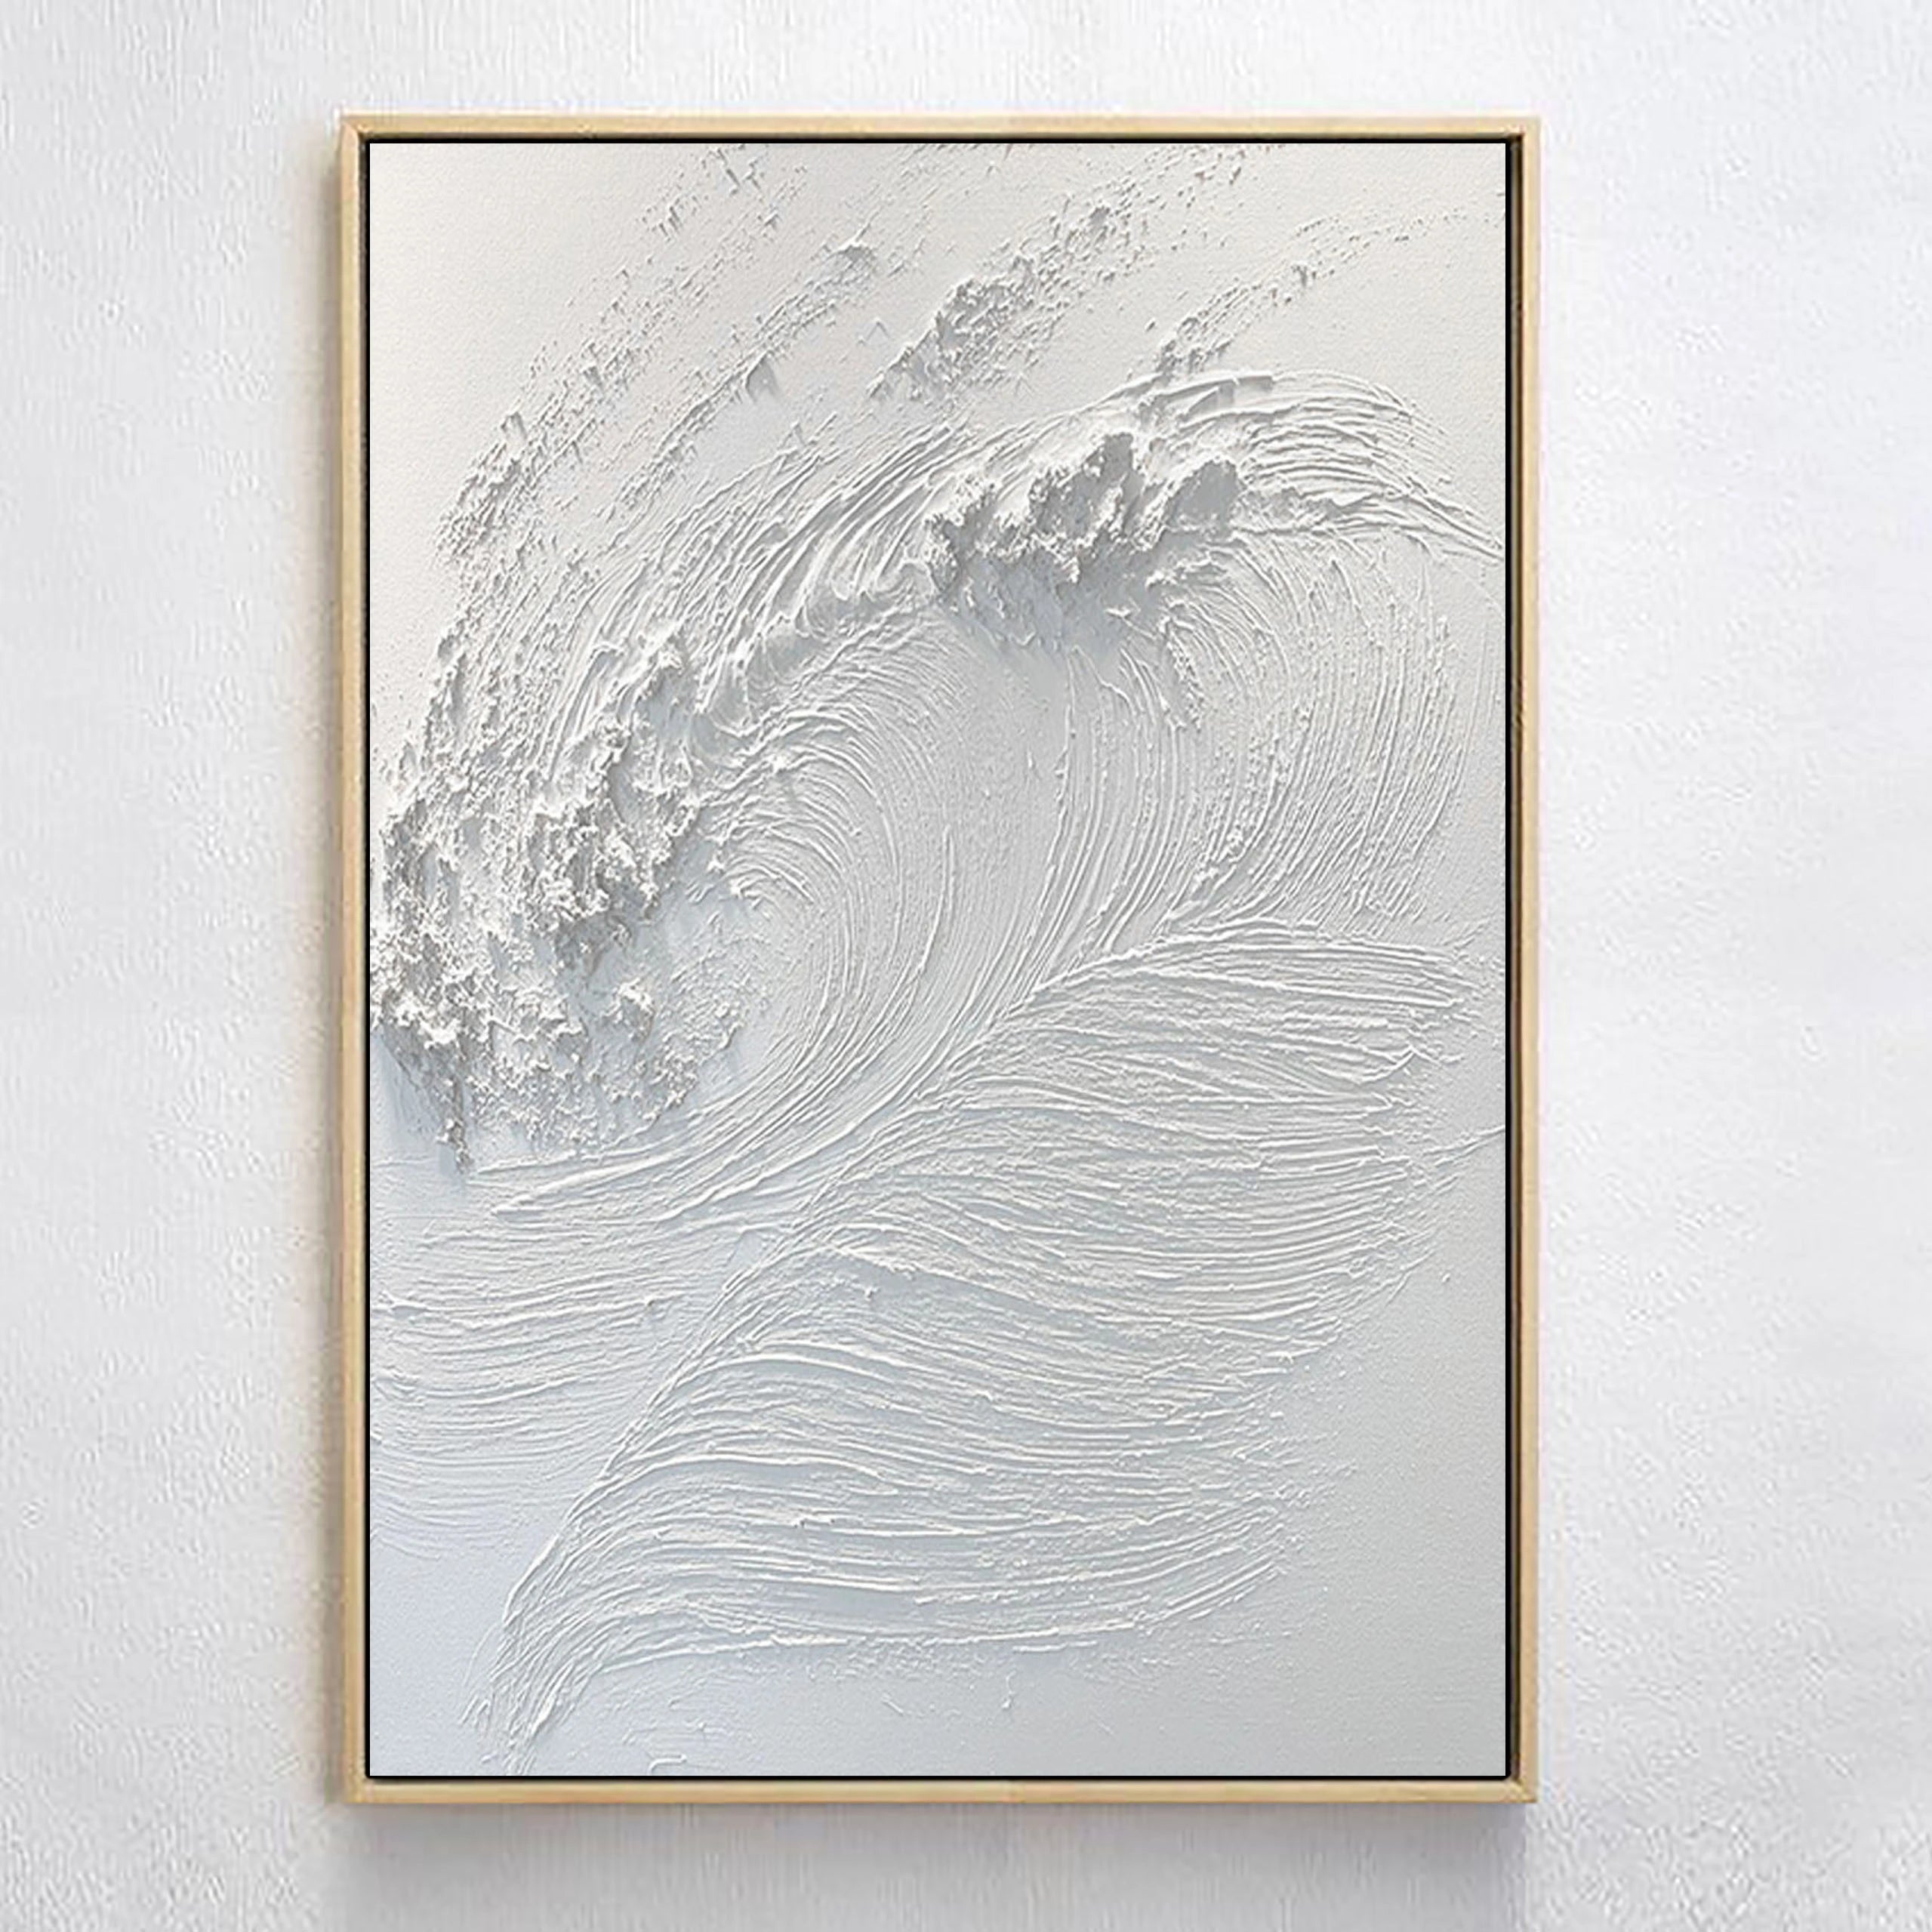 White 3D Textured Plaster Wall Art Surf Art Abstract Handcrafted Painting Minimalist Home Decor